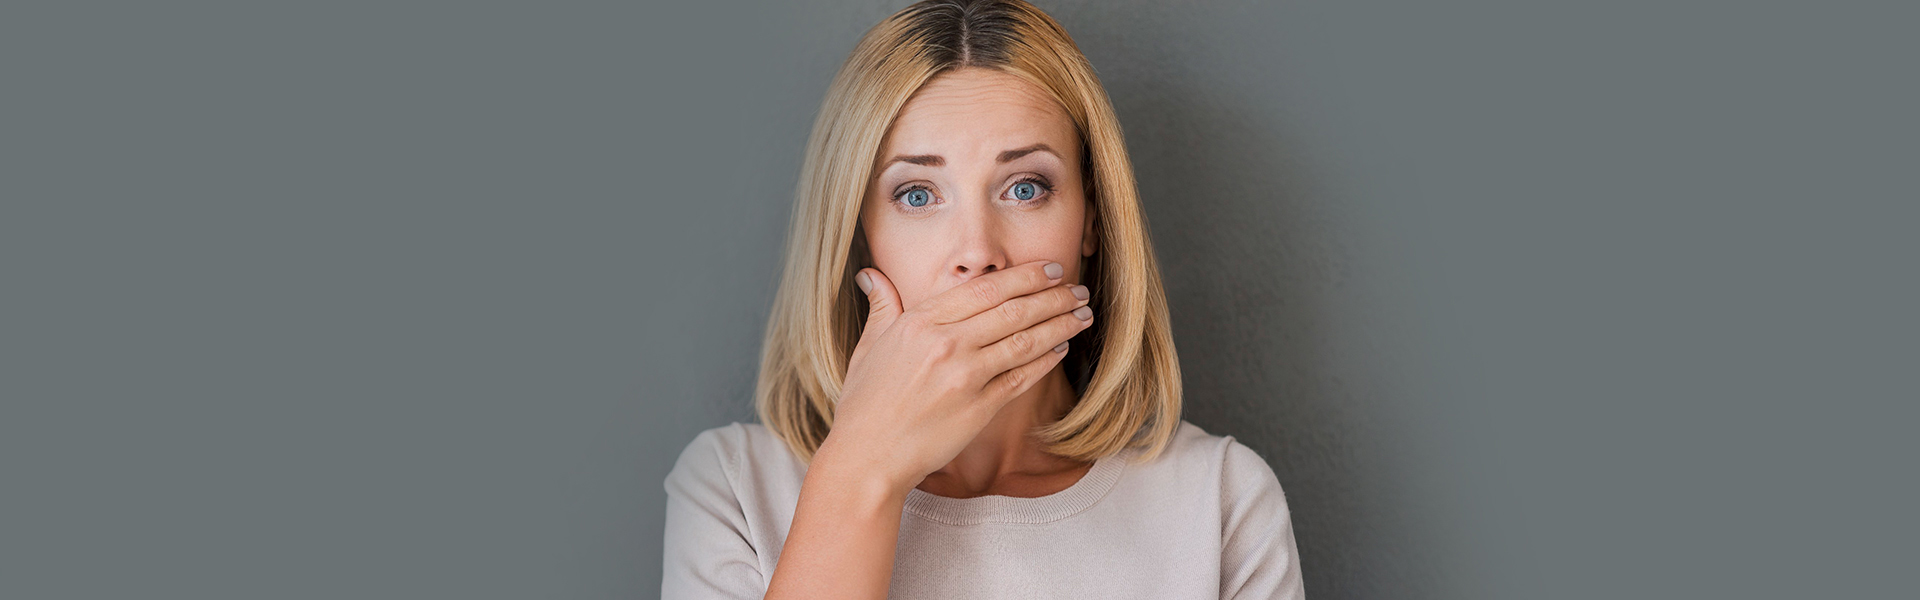 Bad Breath Is a Condition Where Lousy Odor Emanates from Your Mouth